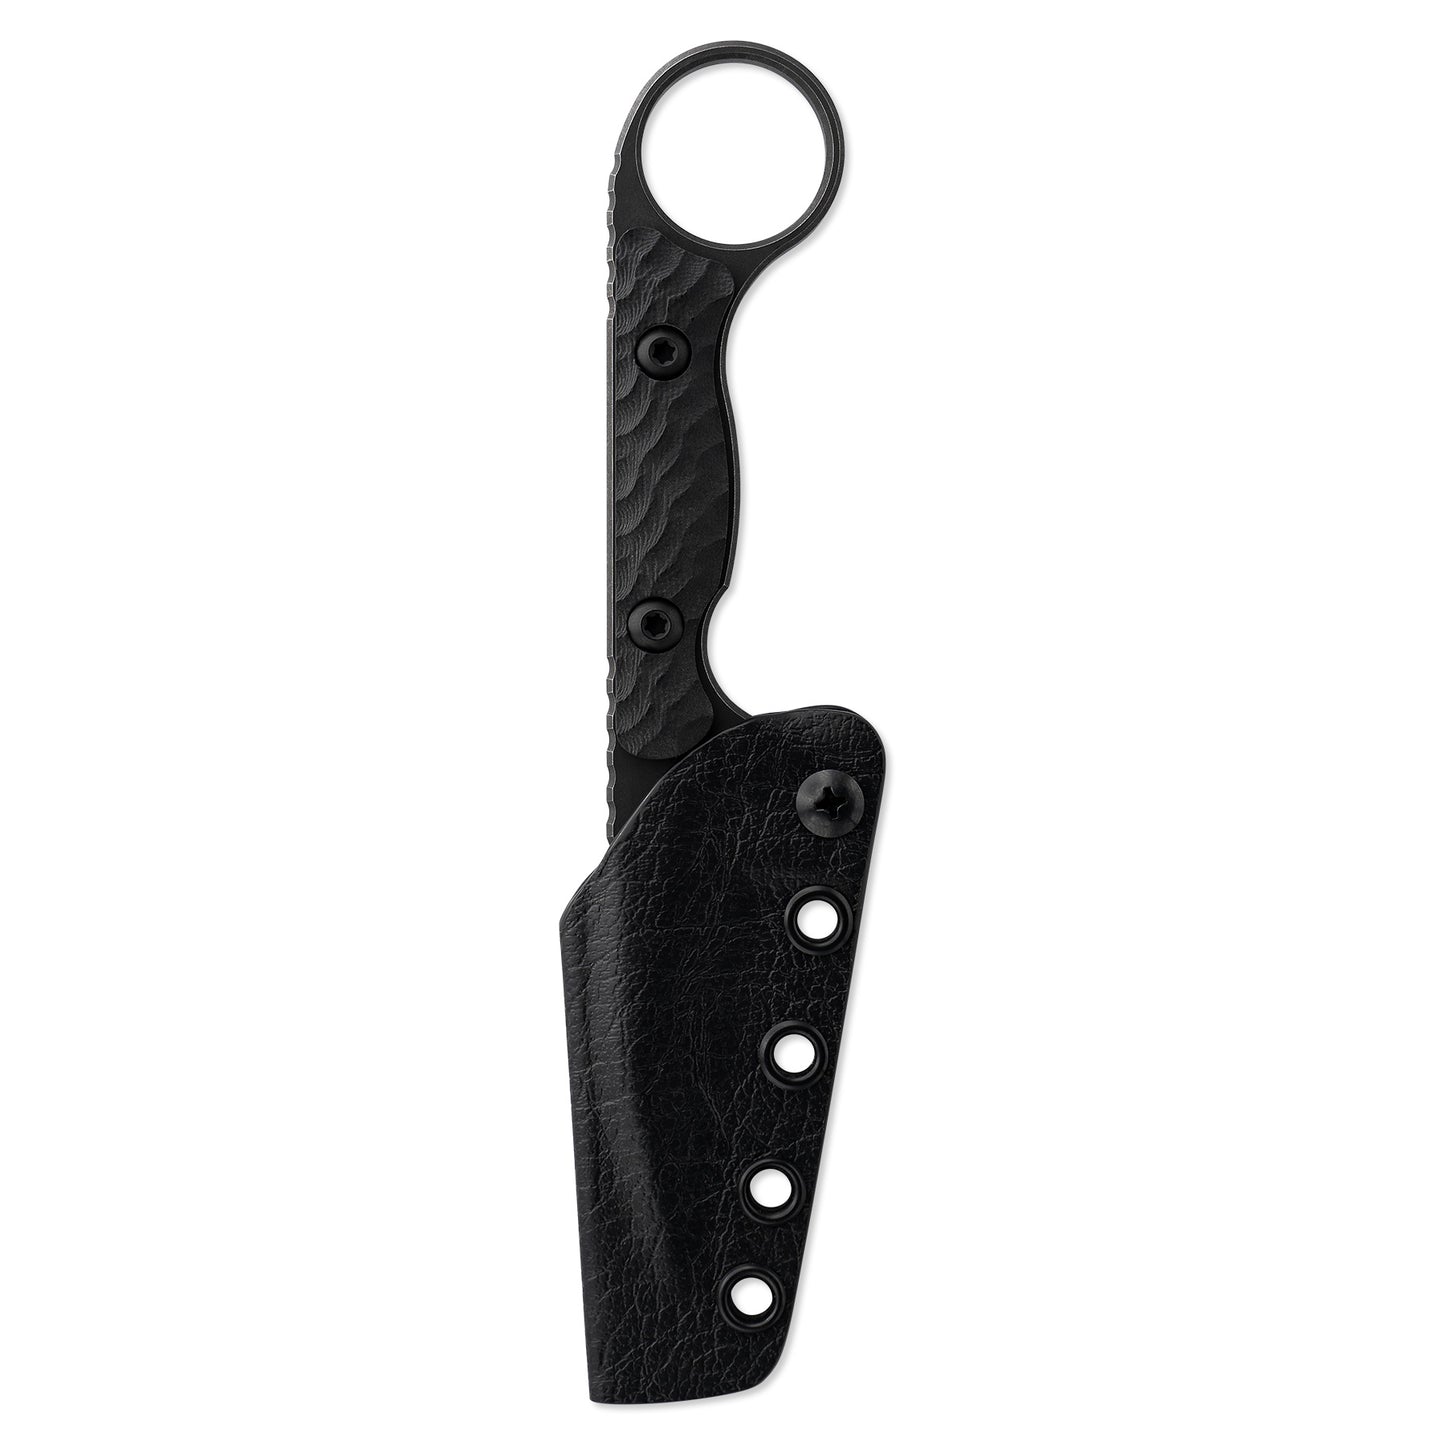 Toor Knives Jank Shank Carbon 5